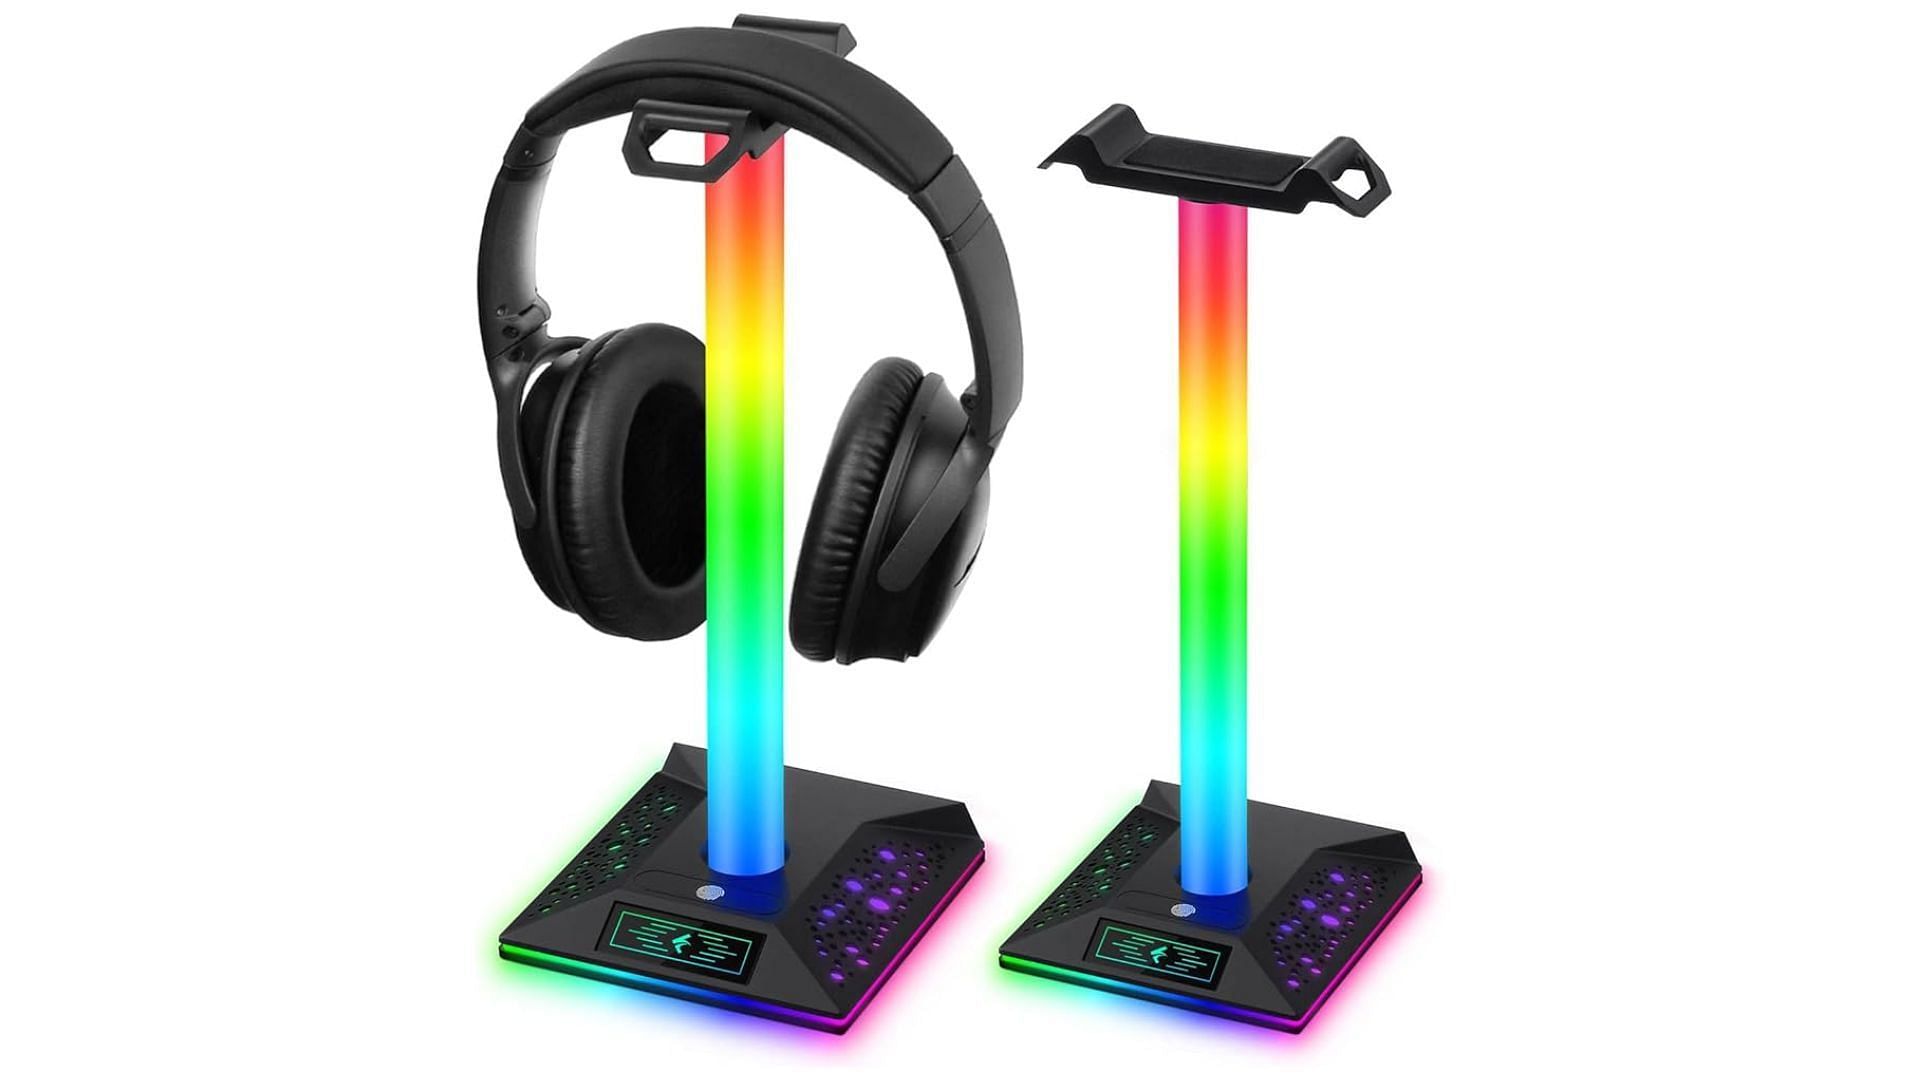 Headset stands with RGB effect (Image via Amazon)